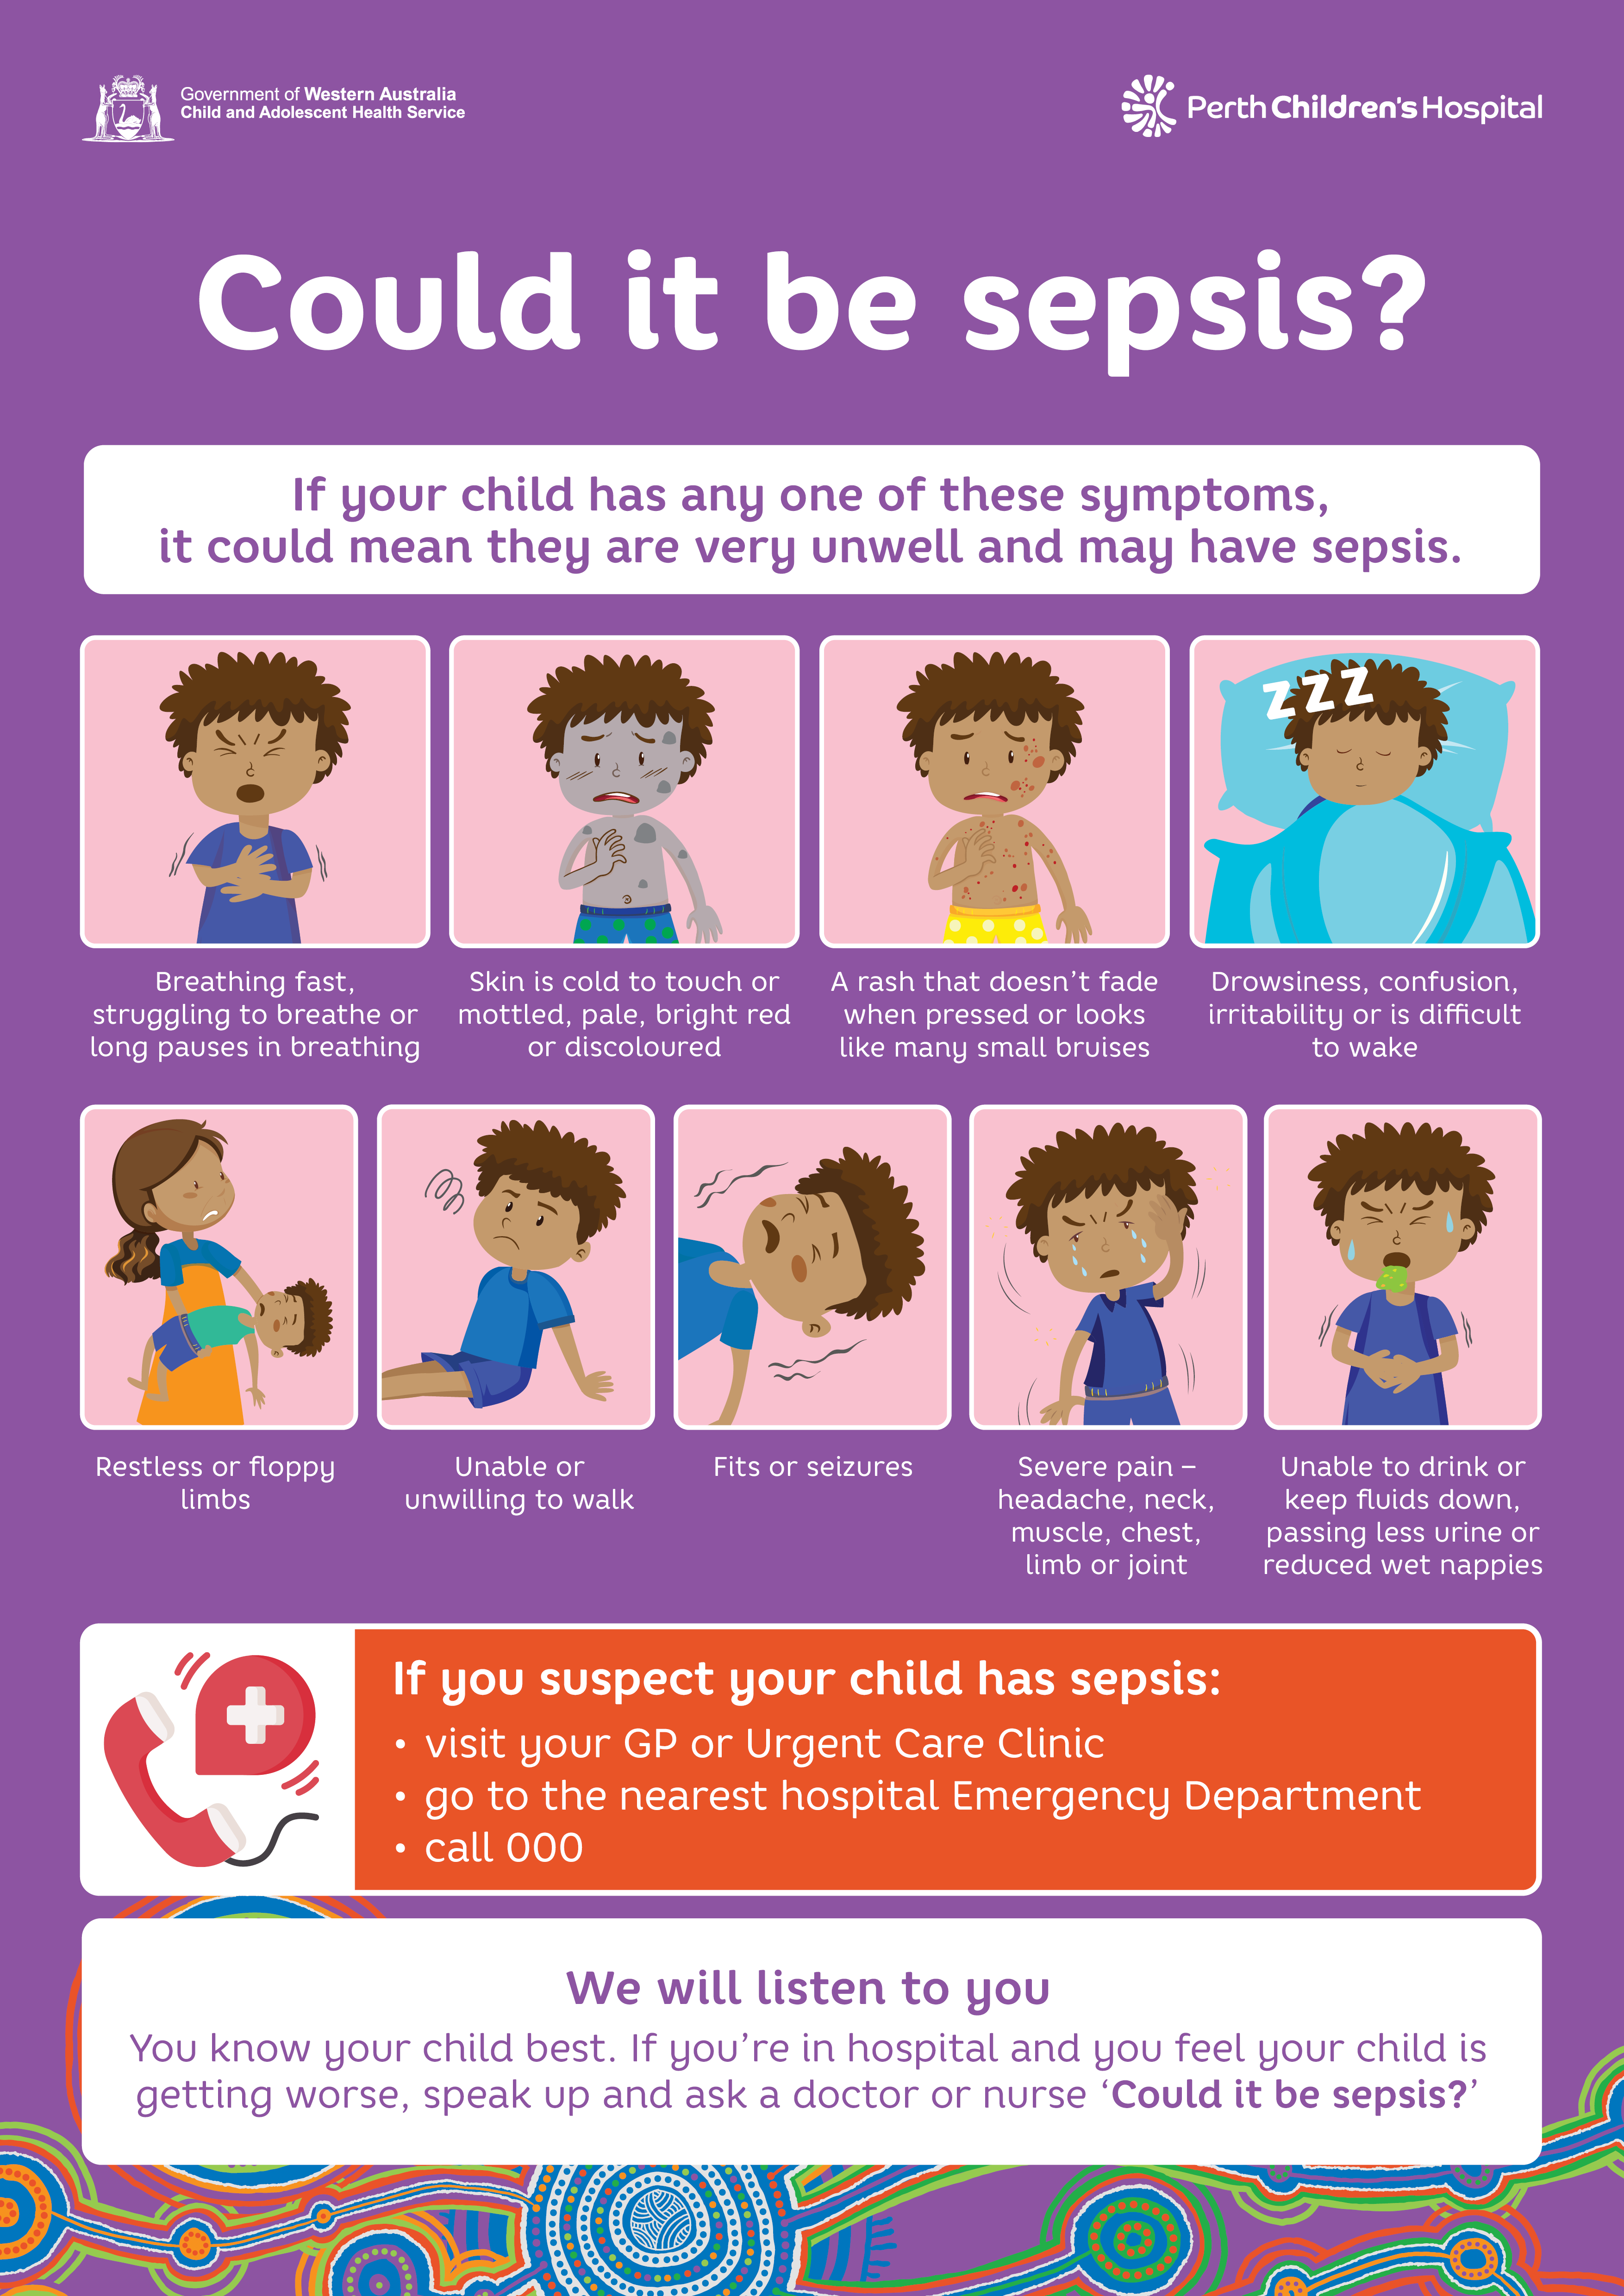 Could it be sepsis? Infographic depicting common signs and symptoms